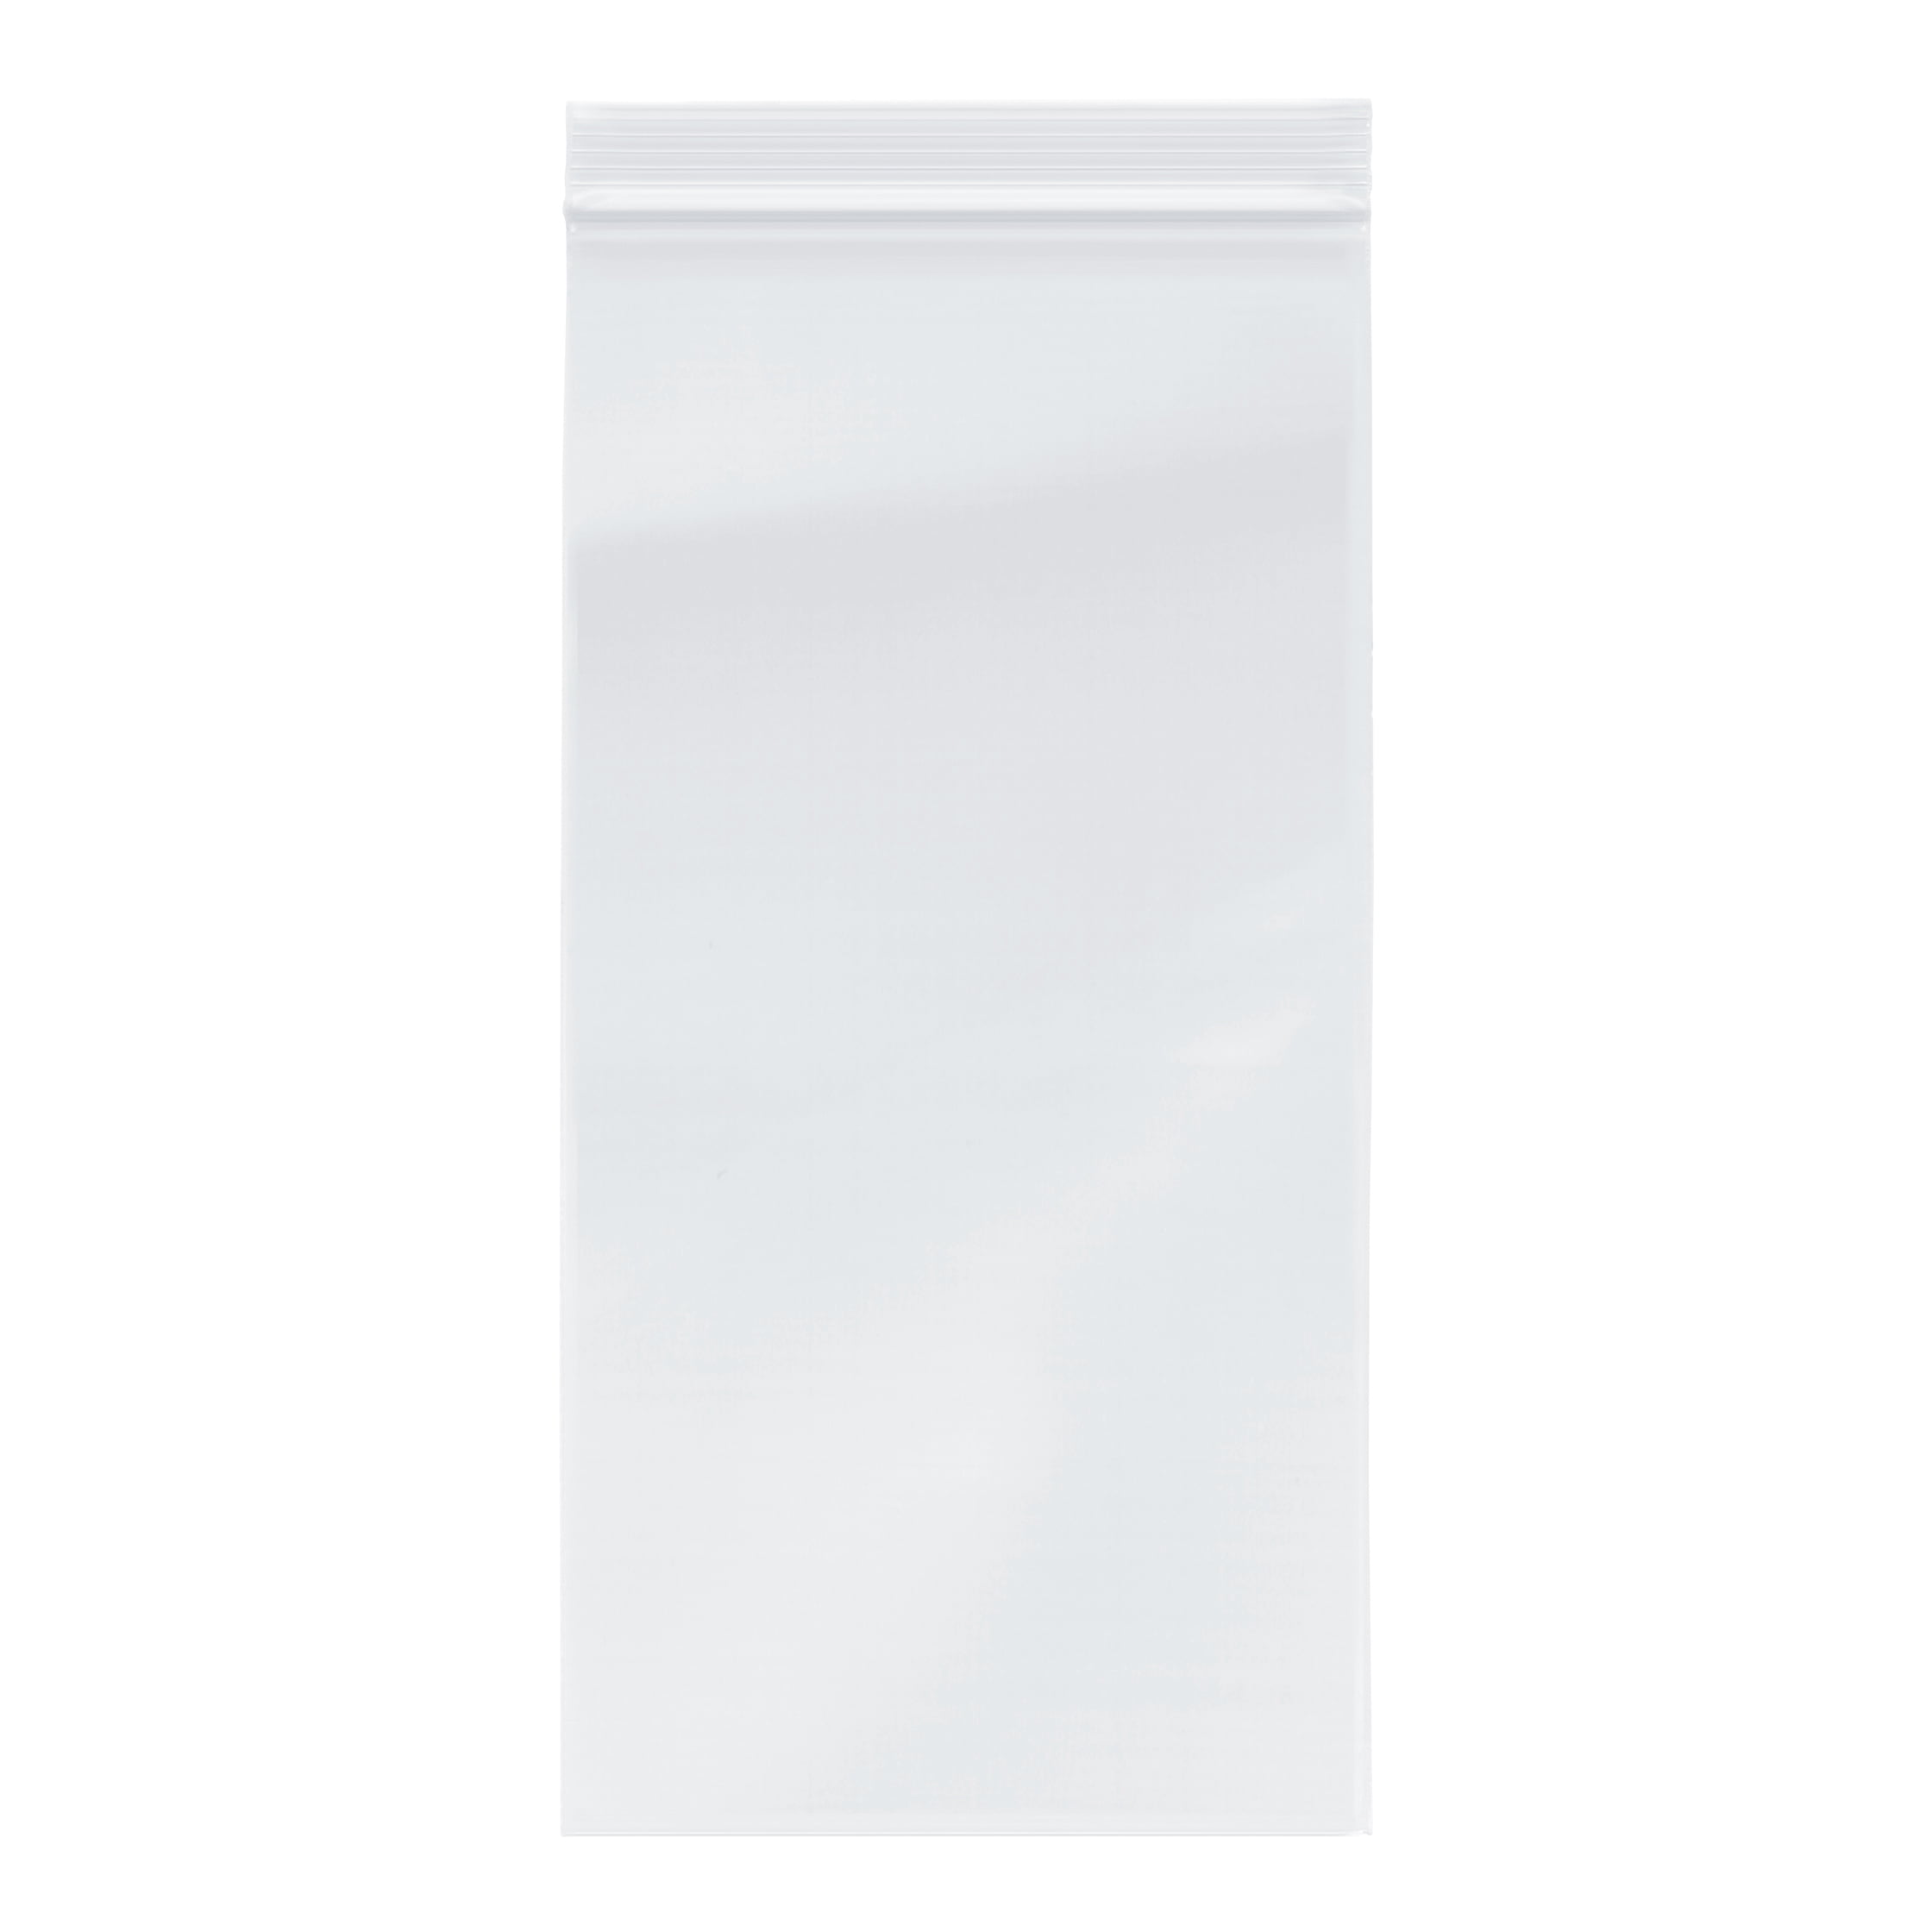 2 Mil Clear Reclosable Poly Bags Zip Lock Top Seal Bag 12" x 12" Pack of 2000 